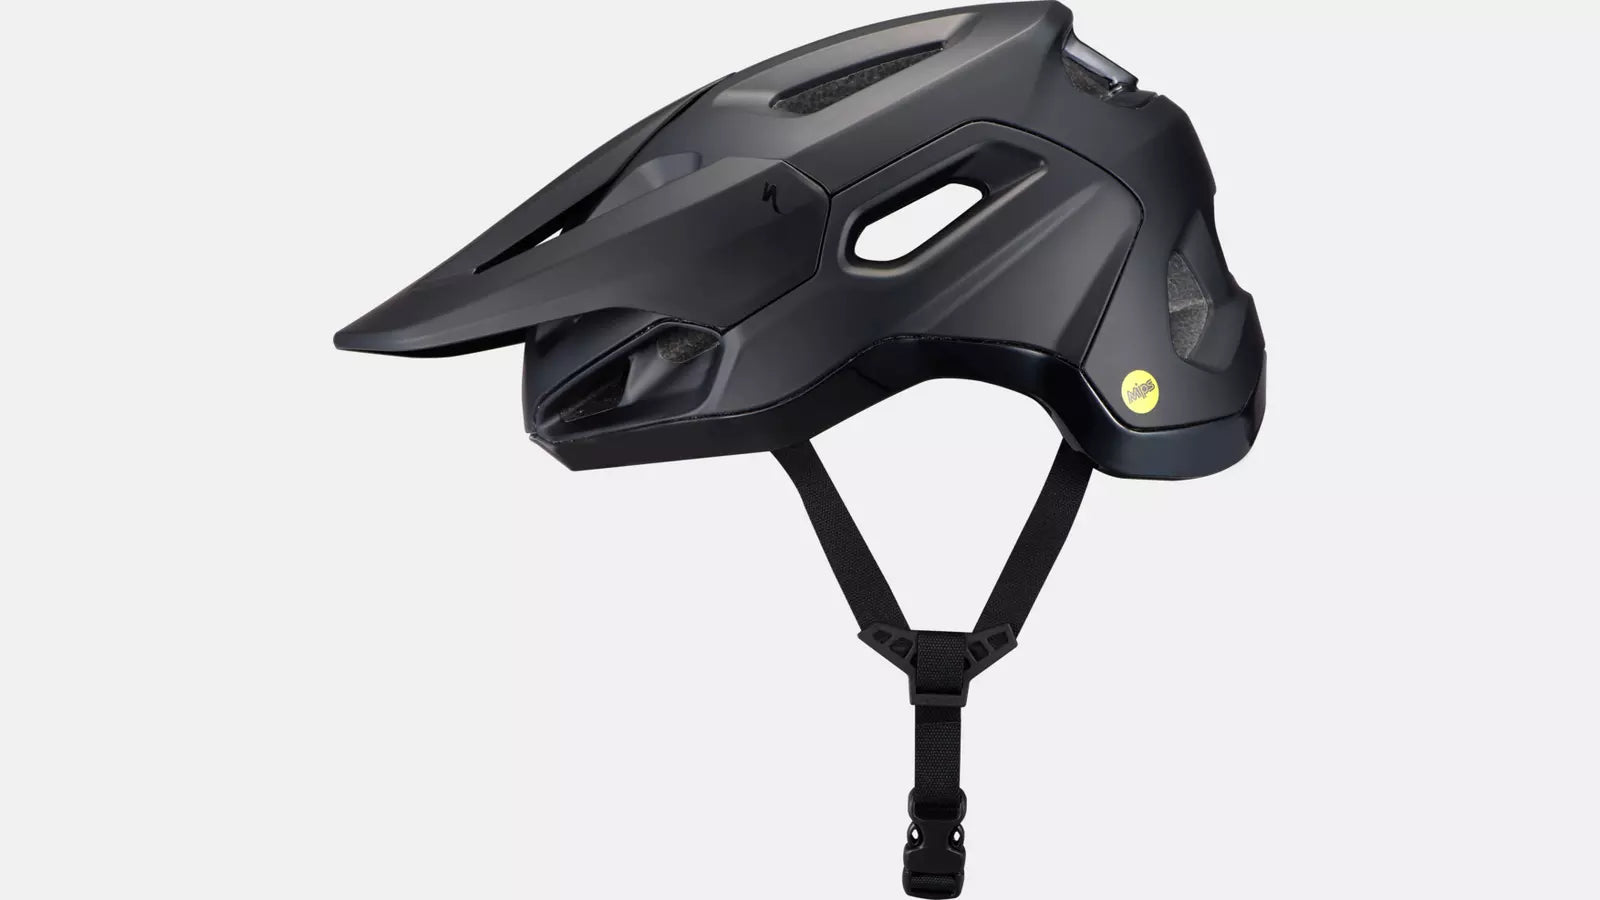 Black Tactic Mips Specialized Bike Helmet with visor, side view